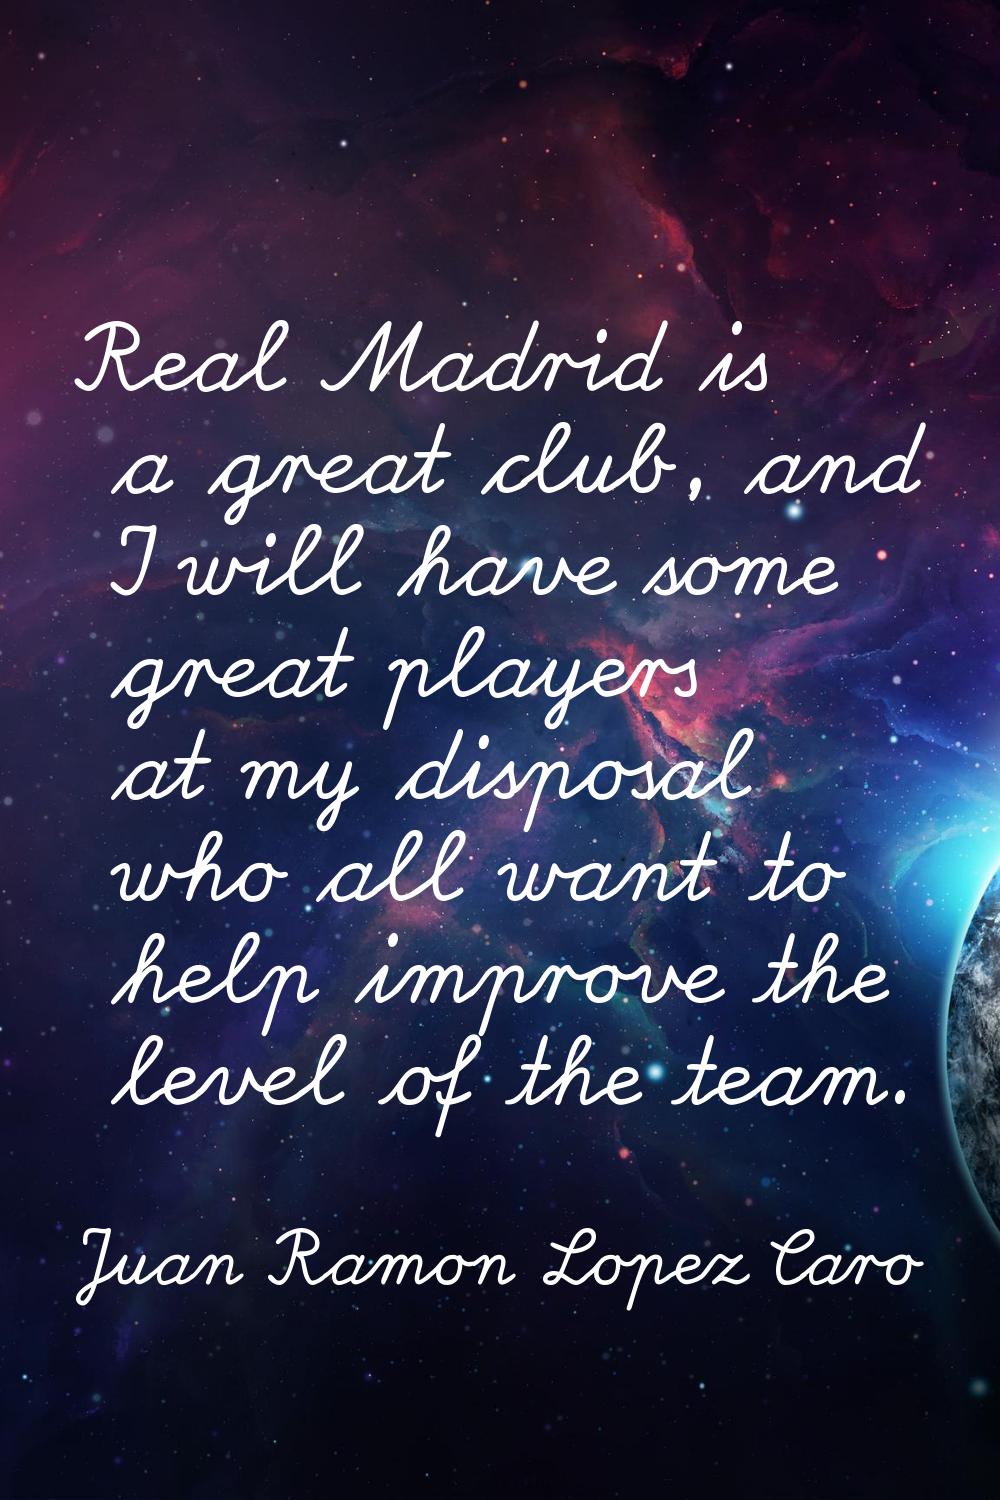 Real Madrid is a great club, and I will have some great players at my disposal who all want to help